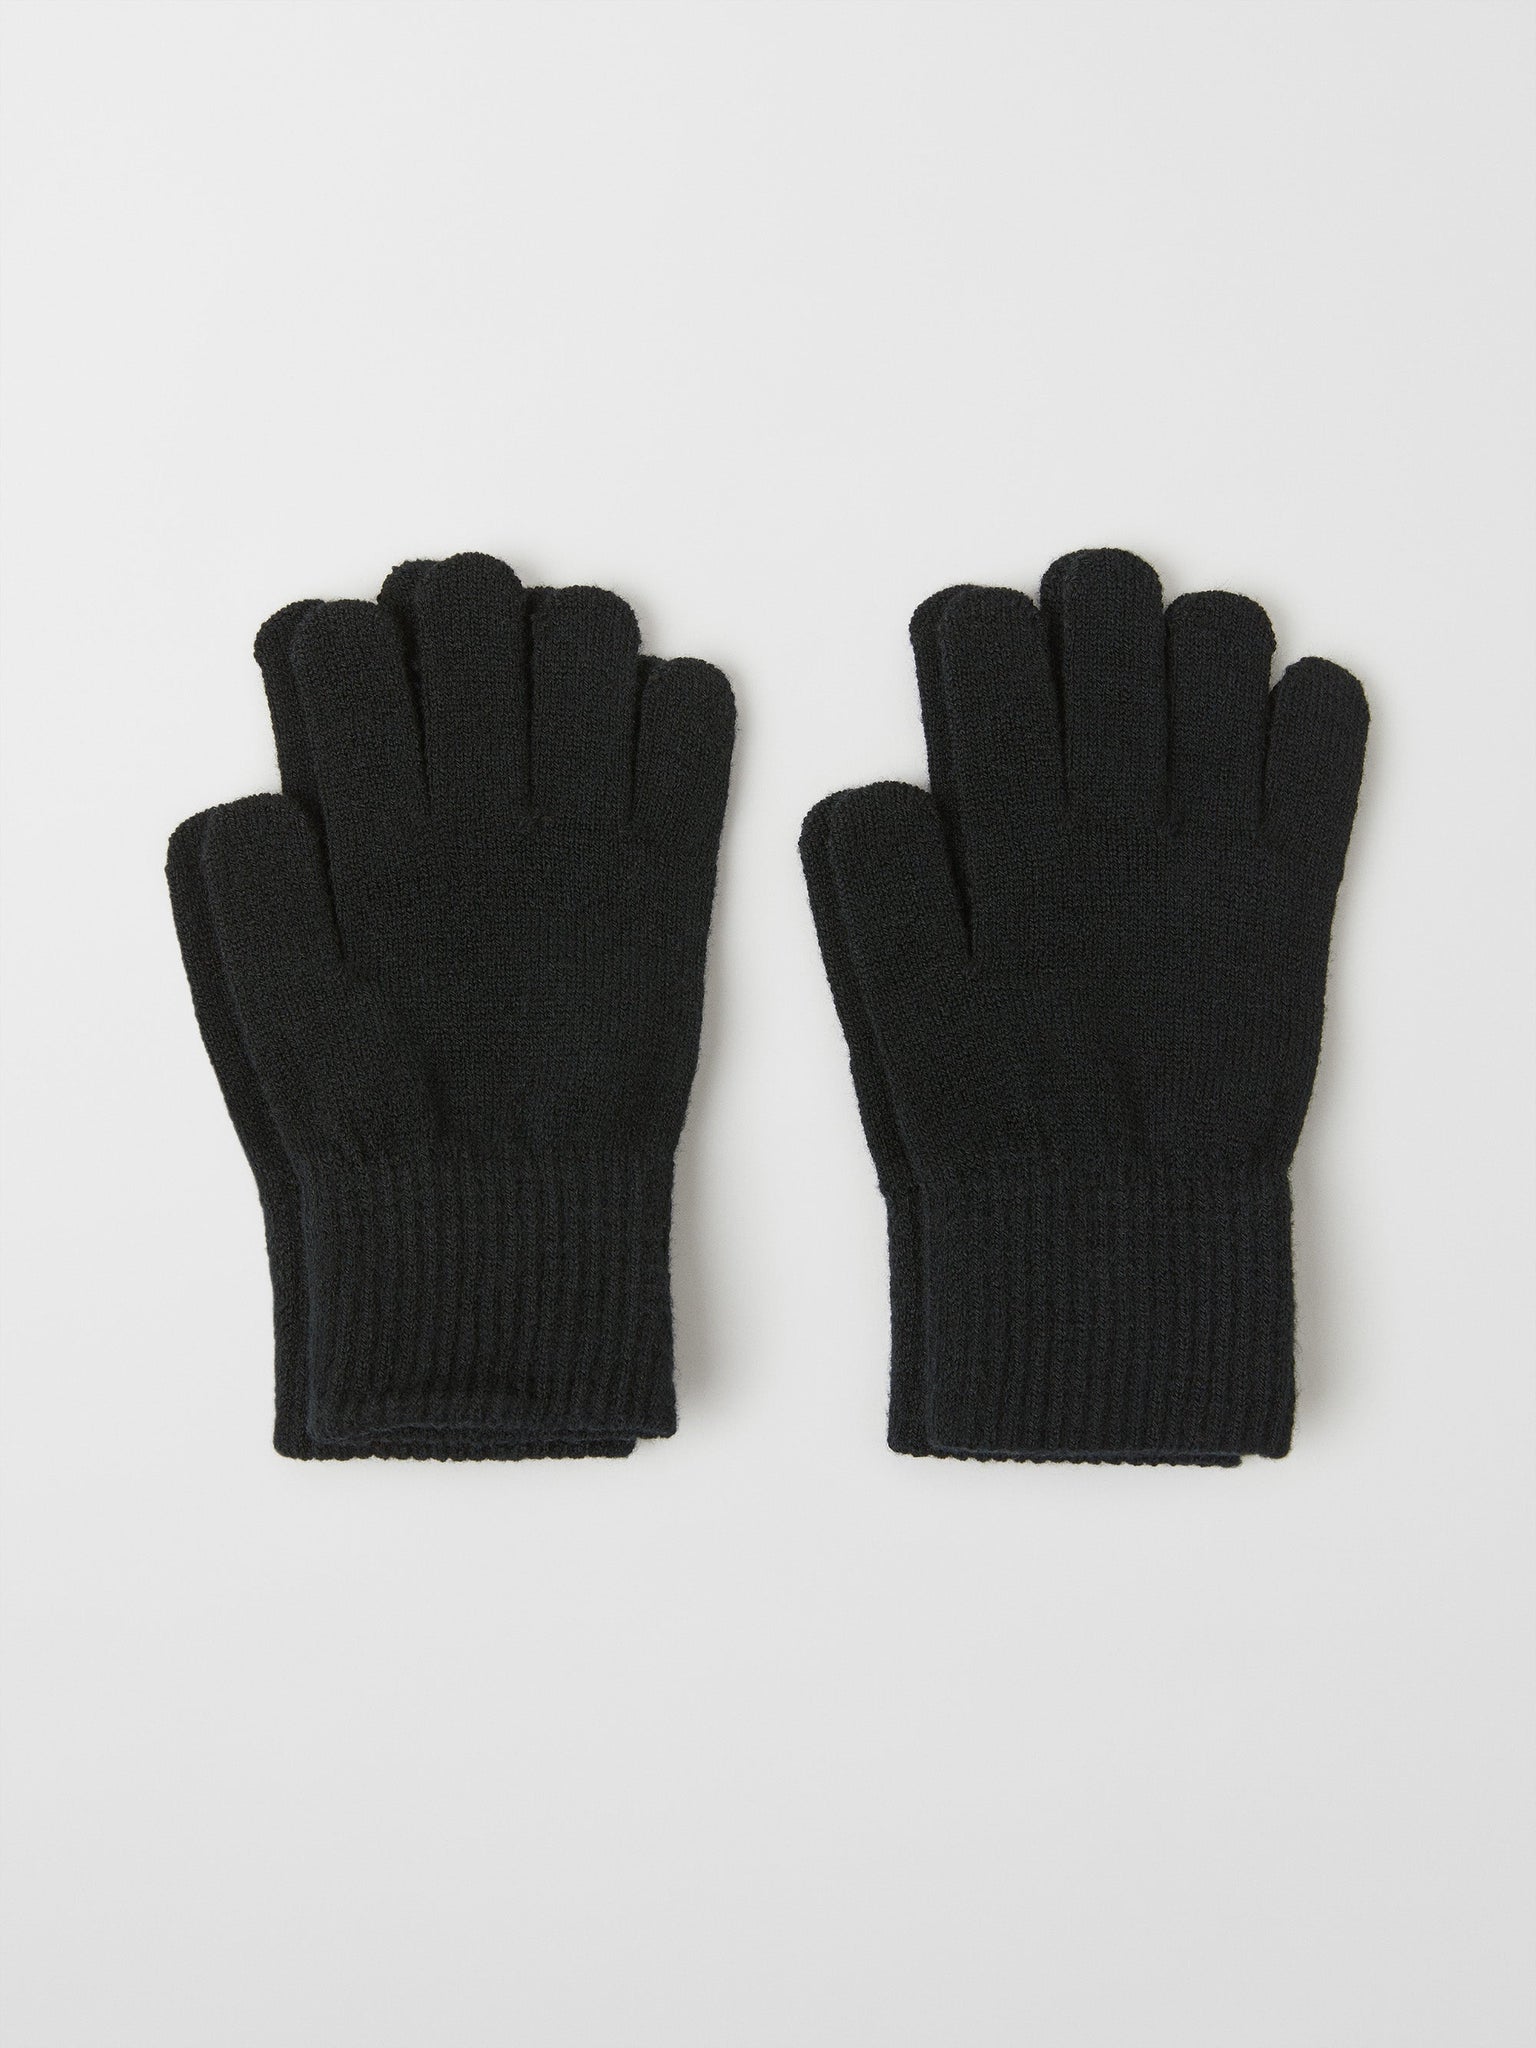 Kids Black Magic Glove Multipack from the Polarn O. Pyret outerwear collection. Quality kids clothing made to last.